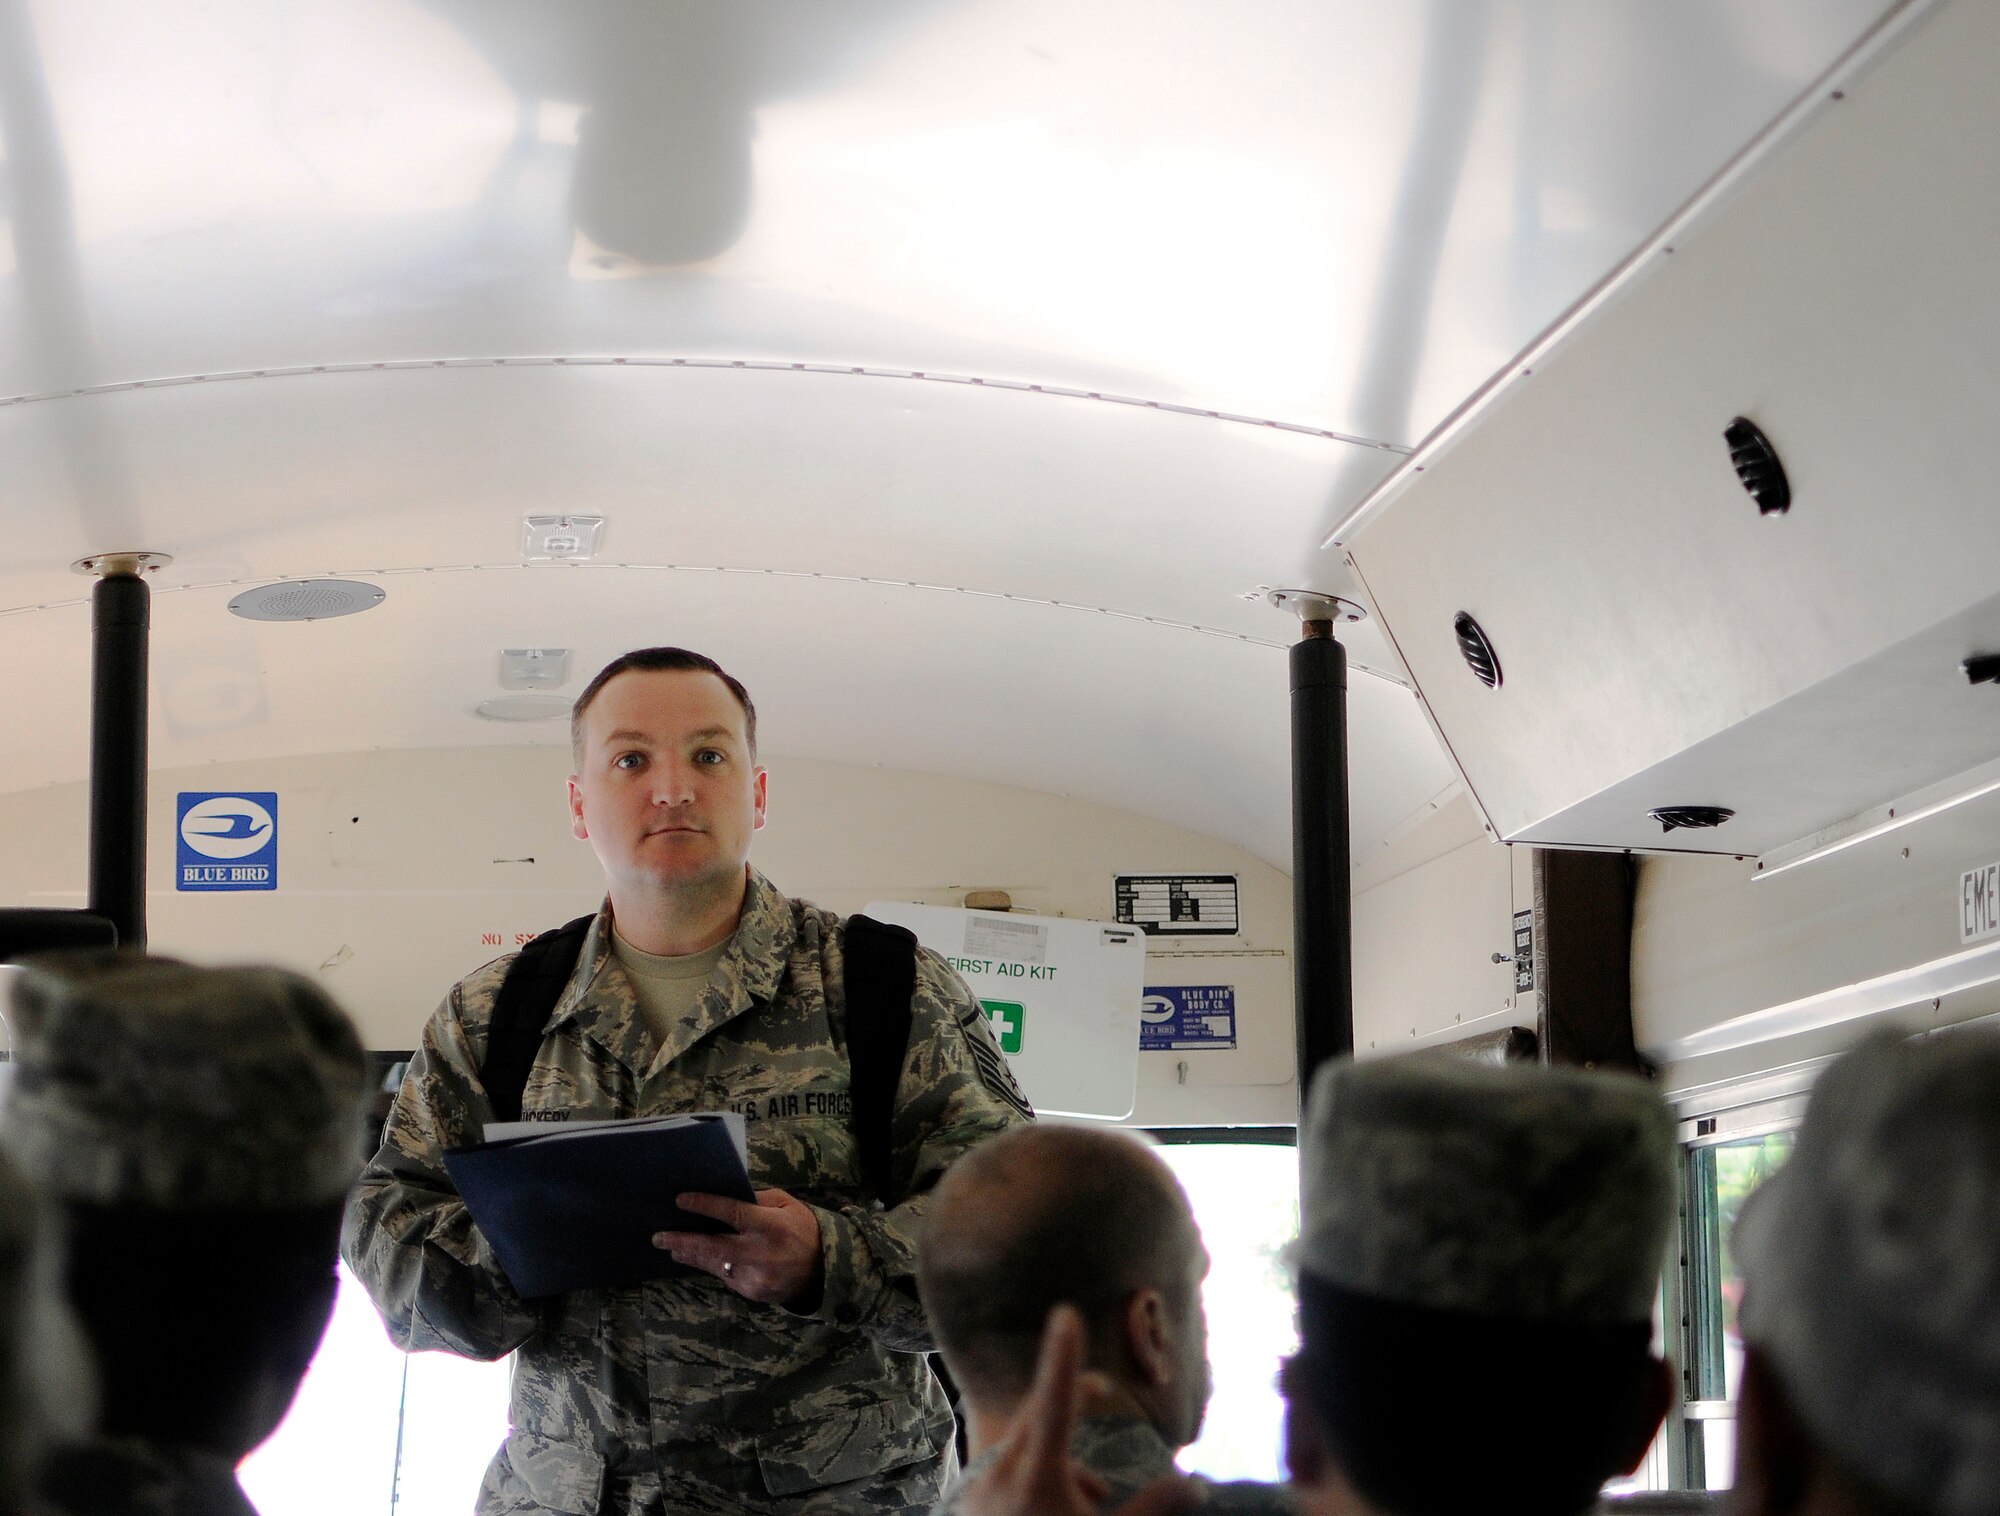 Oregon Air National Guard Master Sgt. Robert Vickery, first sergeant, 142nd Fighter Wing Civil Engineer Squadron (CES) conducts a role call of squadron members as they board a bus  at the Portland Air National Guard Base, Ore., May 5, 2015. The 142nd CES is taking part in a mission to Romania to rebuild an aging hospital as part of US European Command's Humanitarian Assistance Program. (U.S. Air National Guard photo by Staff Sgt. Brandon Boyd, 142nd Fighter Wing Public Affairs/Released)